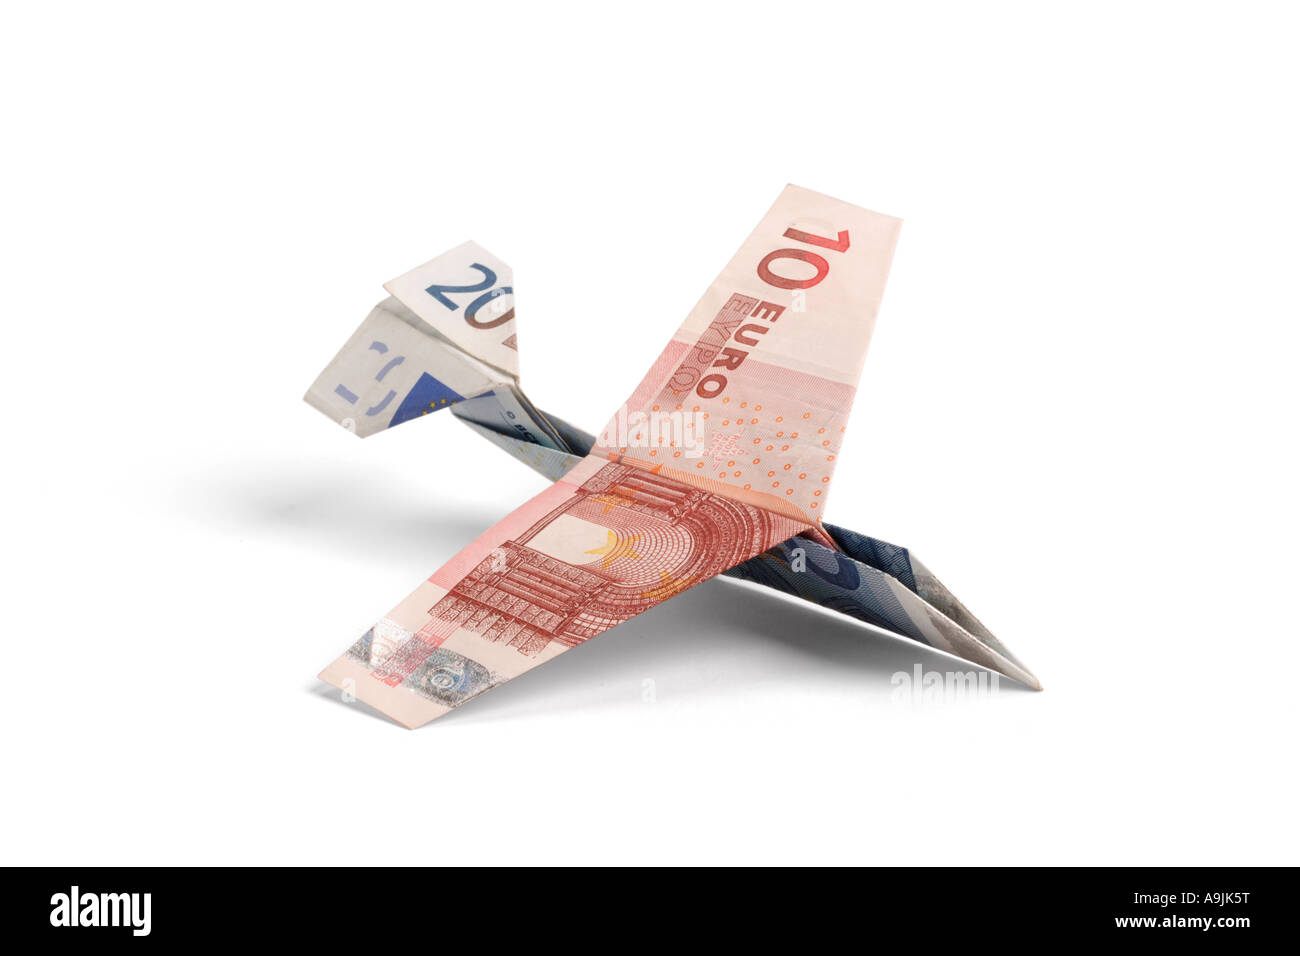 Airplane made of euro notes Stock Photo